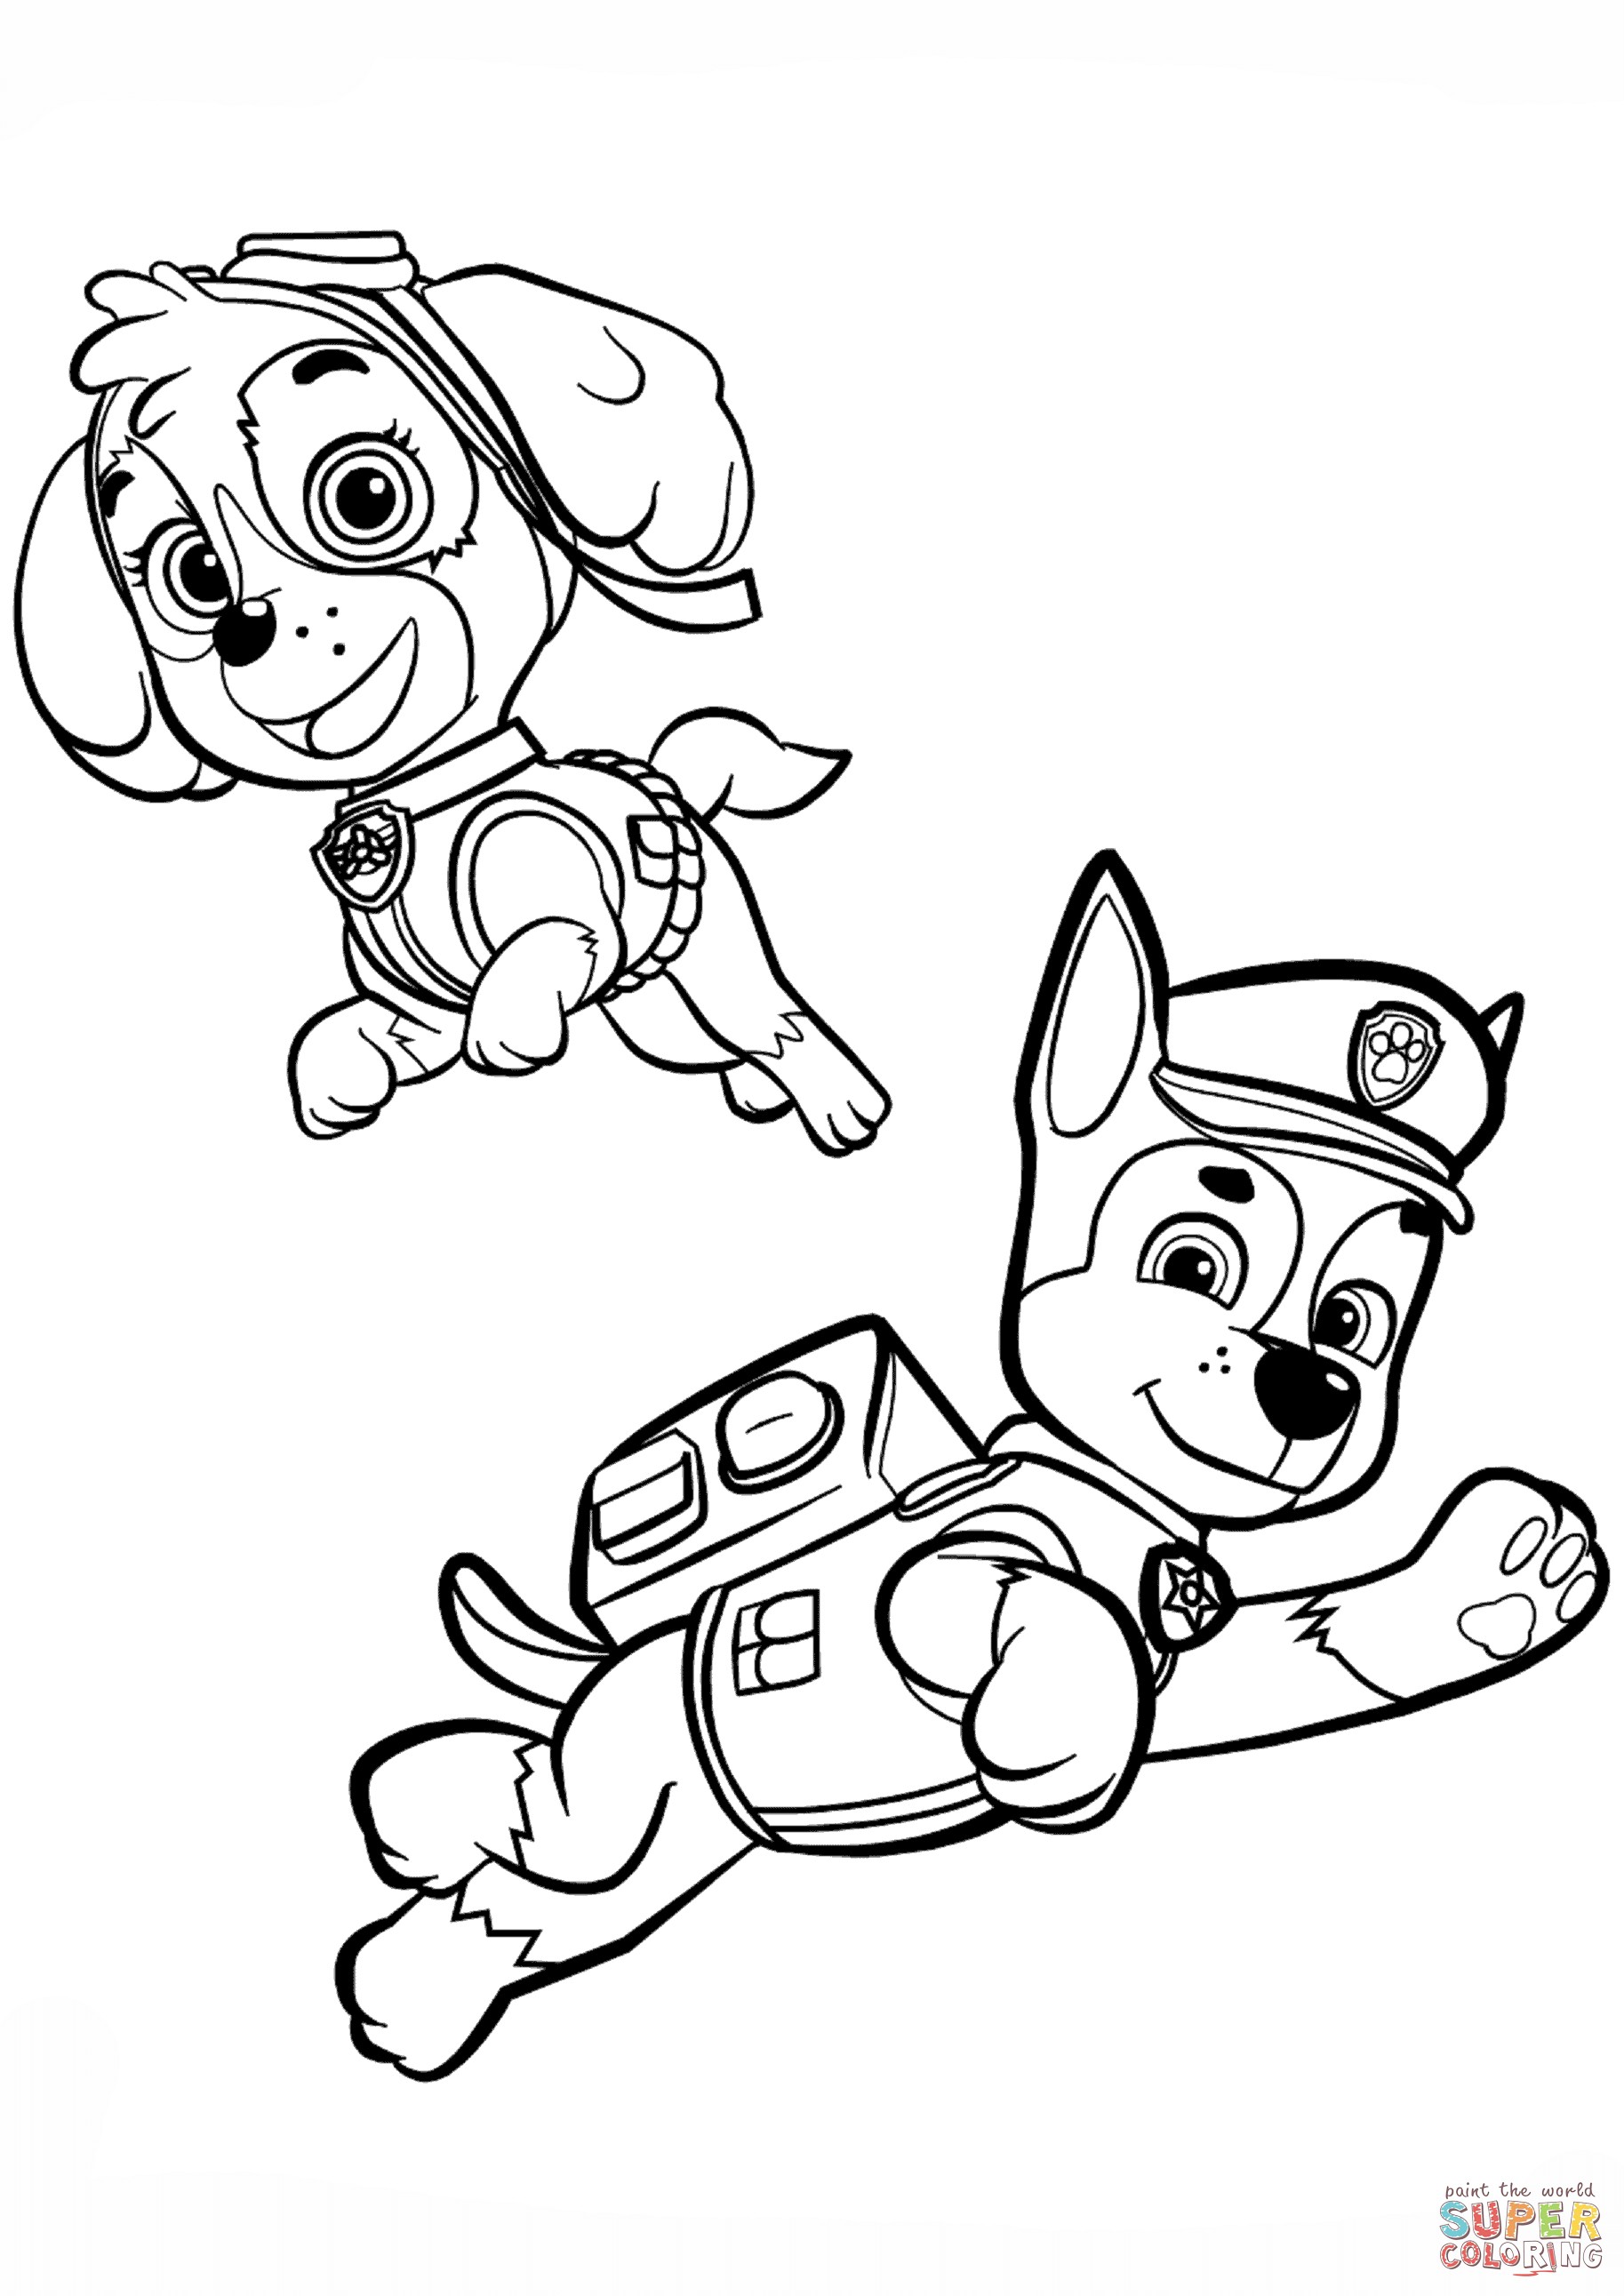 Skye Paw Patrol Coloring Pages at Free printable colorings pages to print and